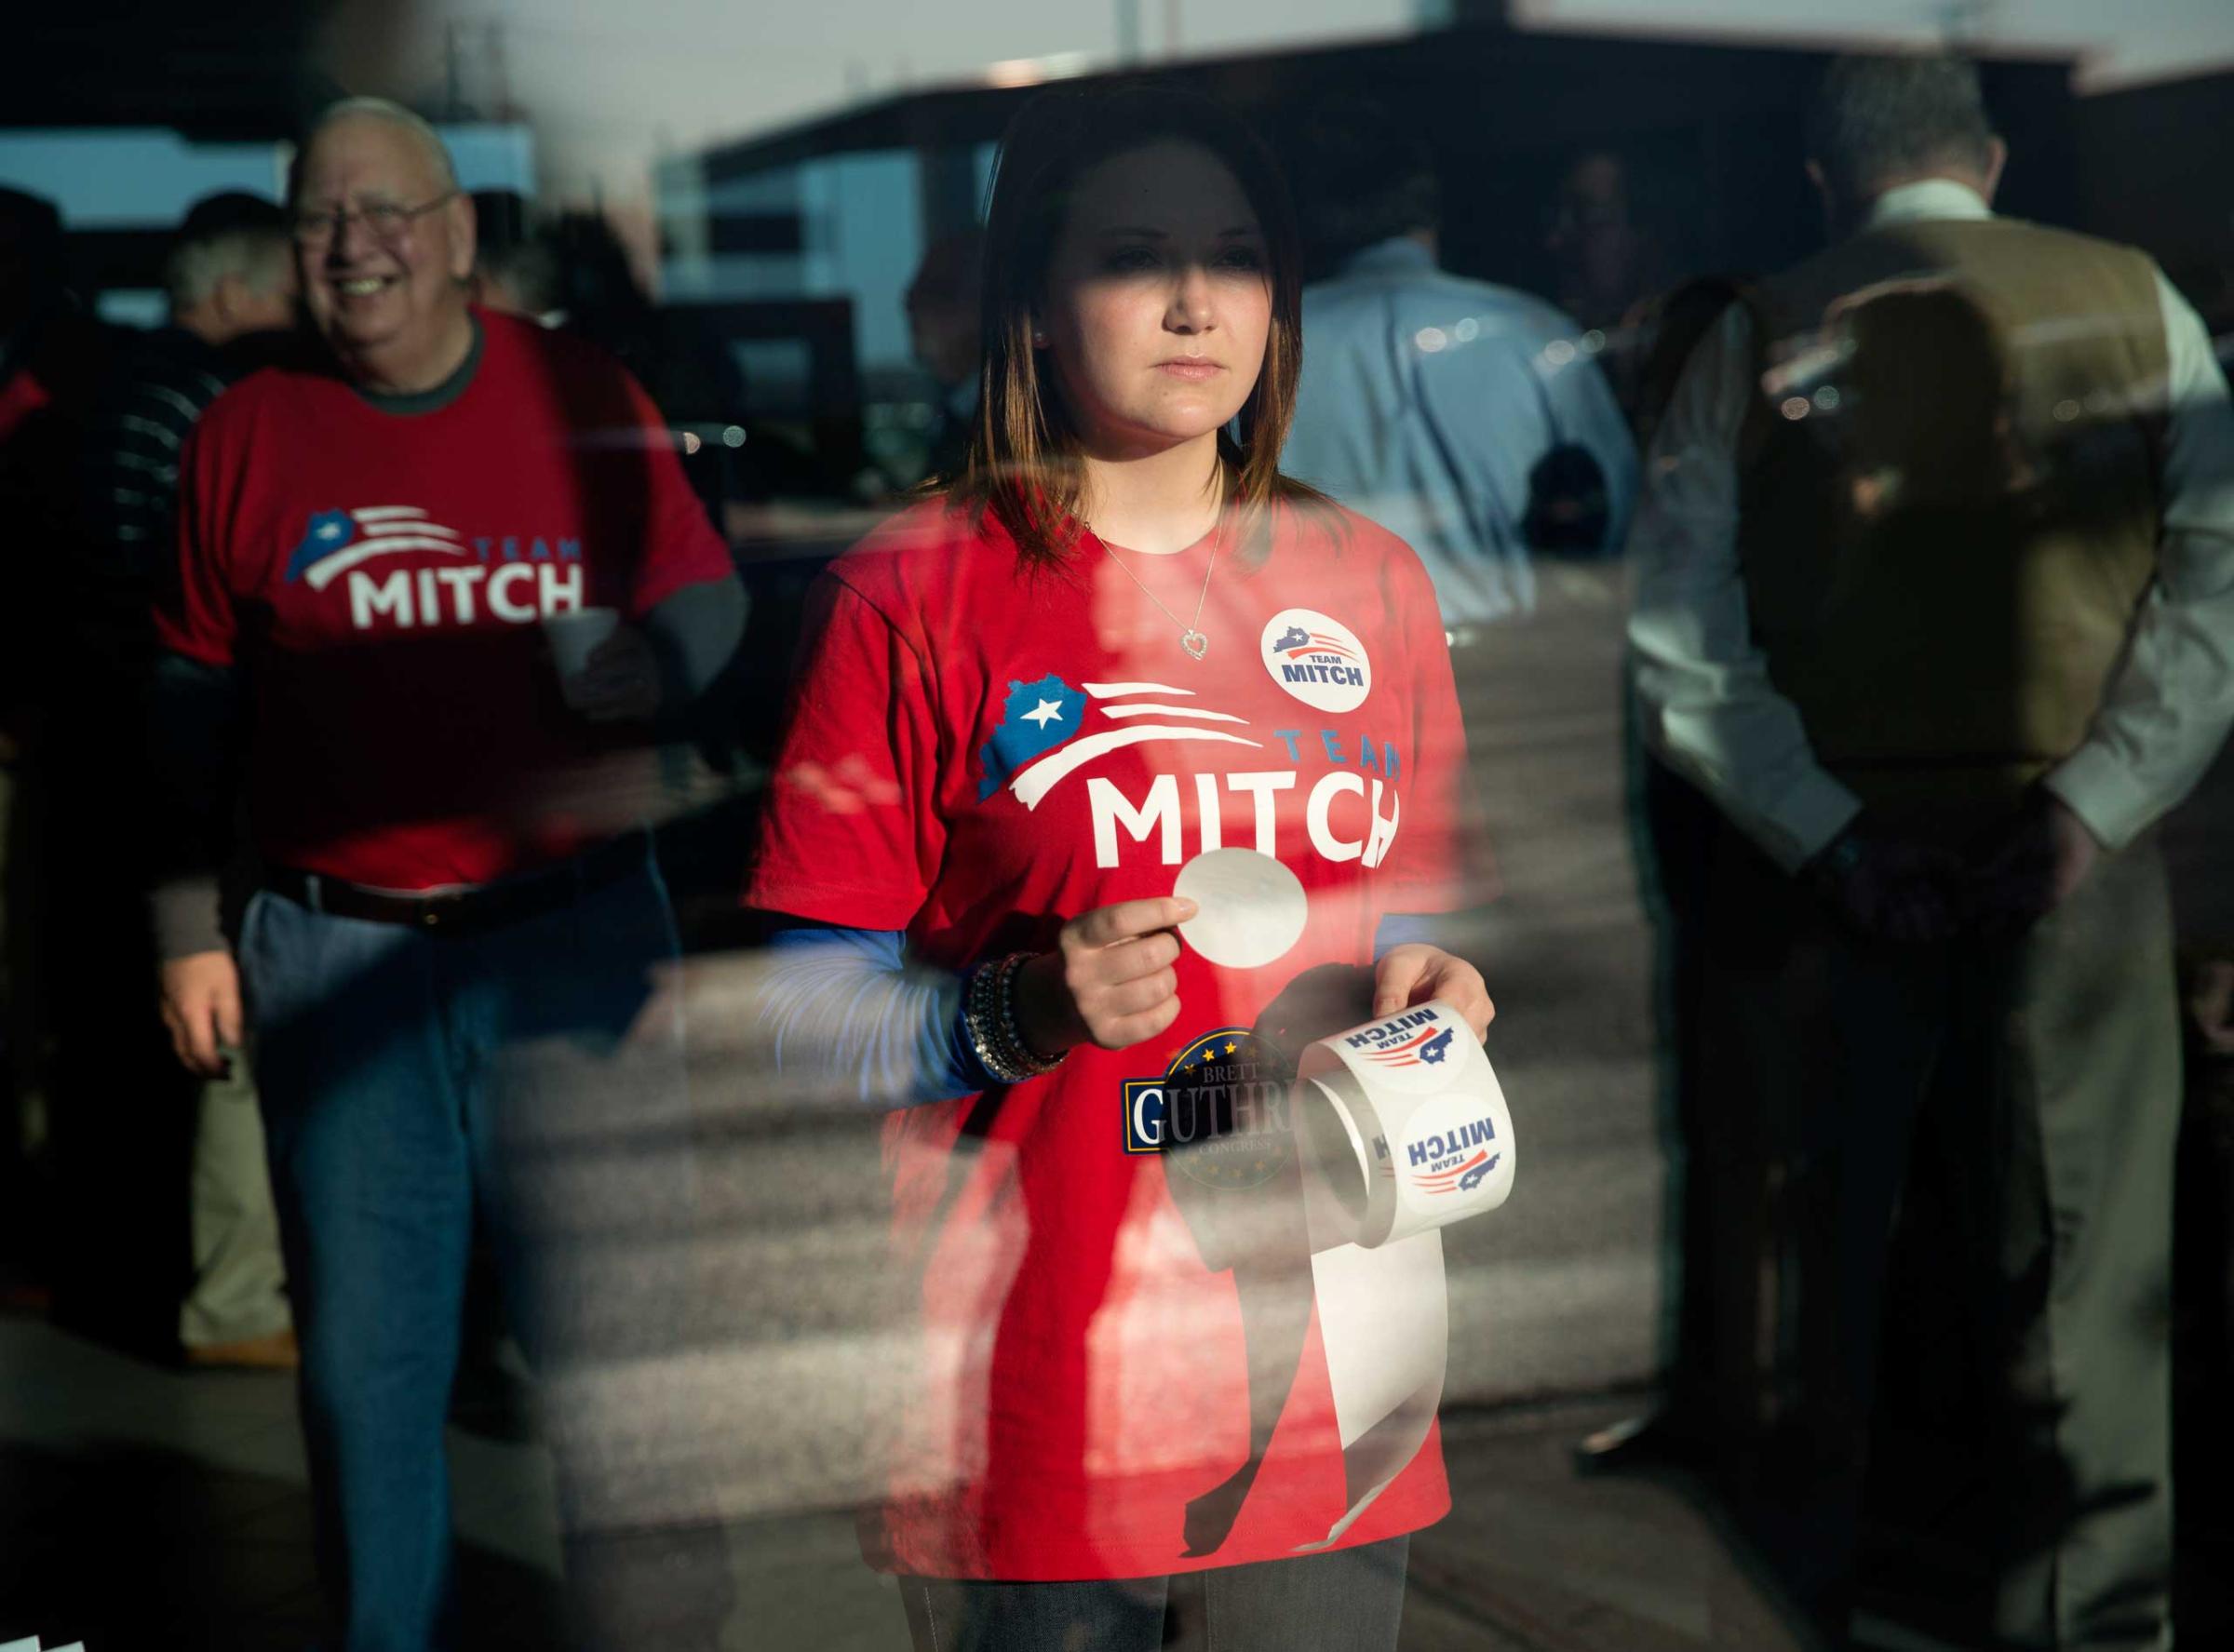 Supporters of Sen. Mitch McConnell attend a campaign rally at Bowling Green-Warren Co. Regional Airport in Bowling Green, Ky. on Nov. 3, 2014.